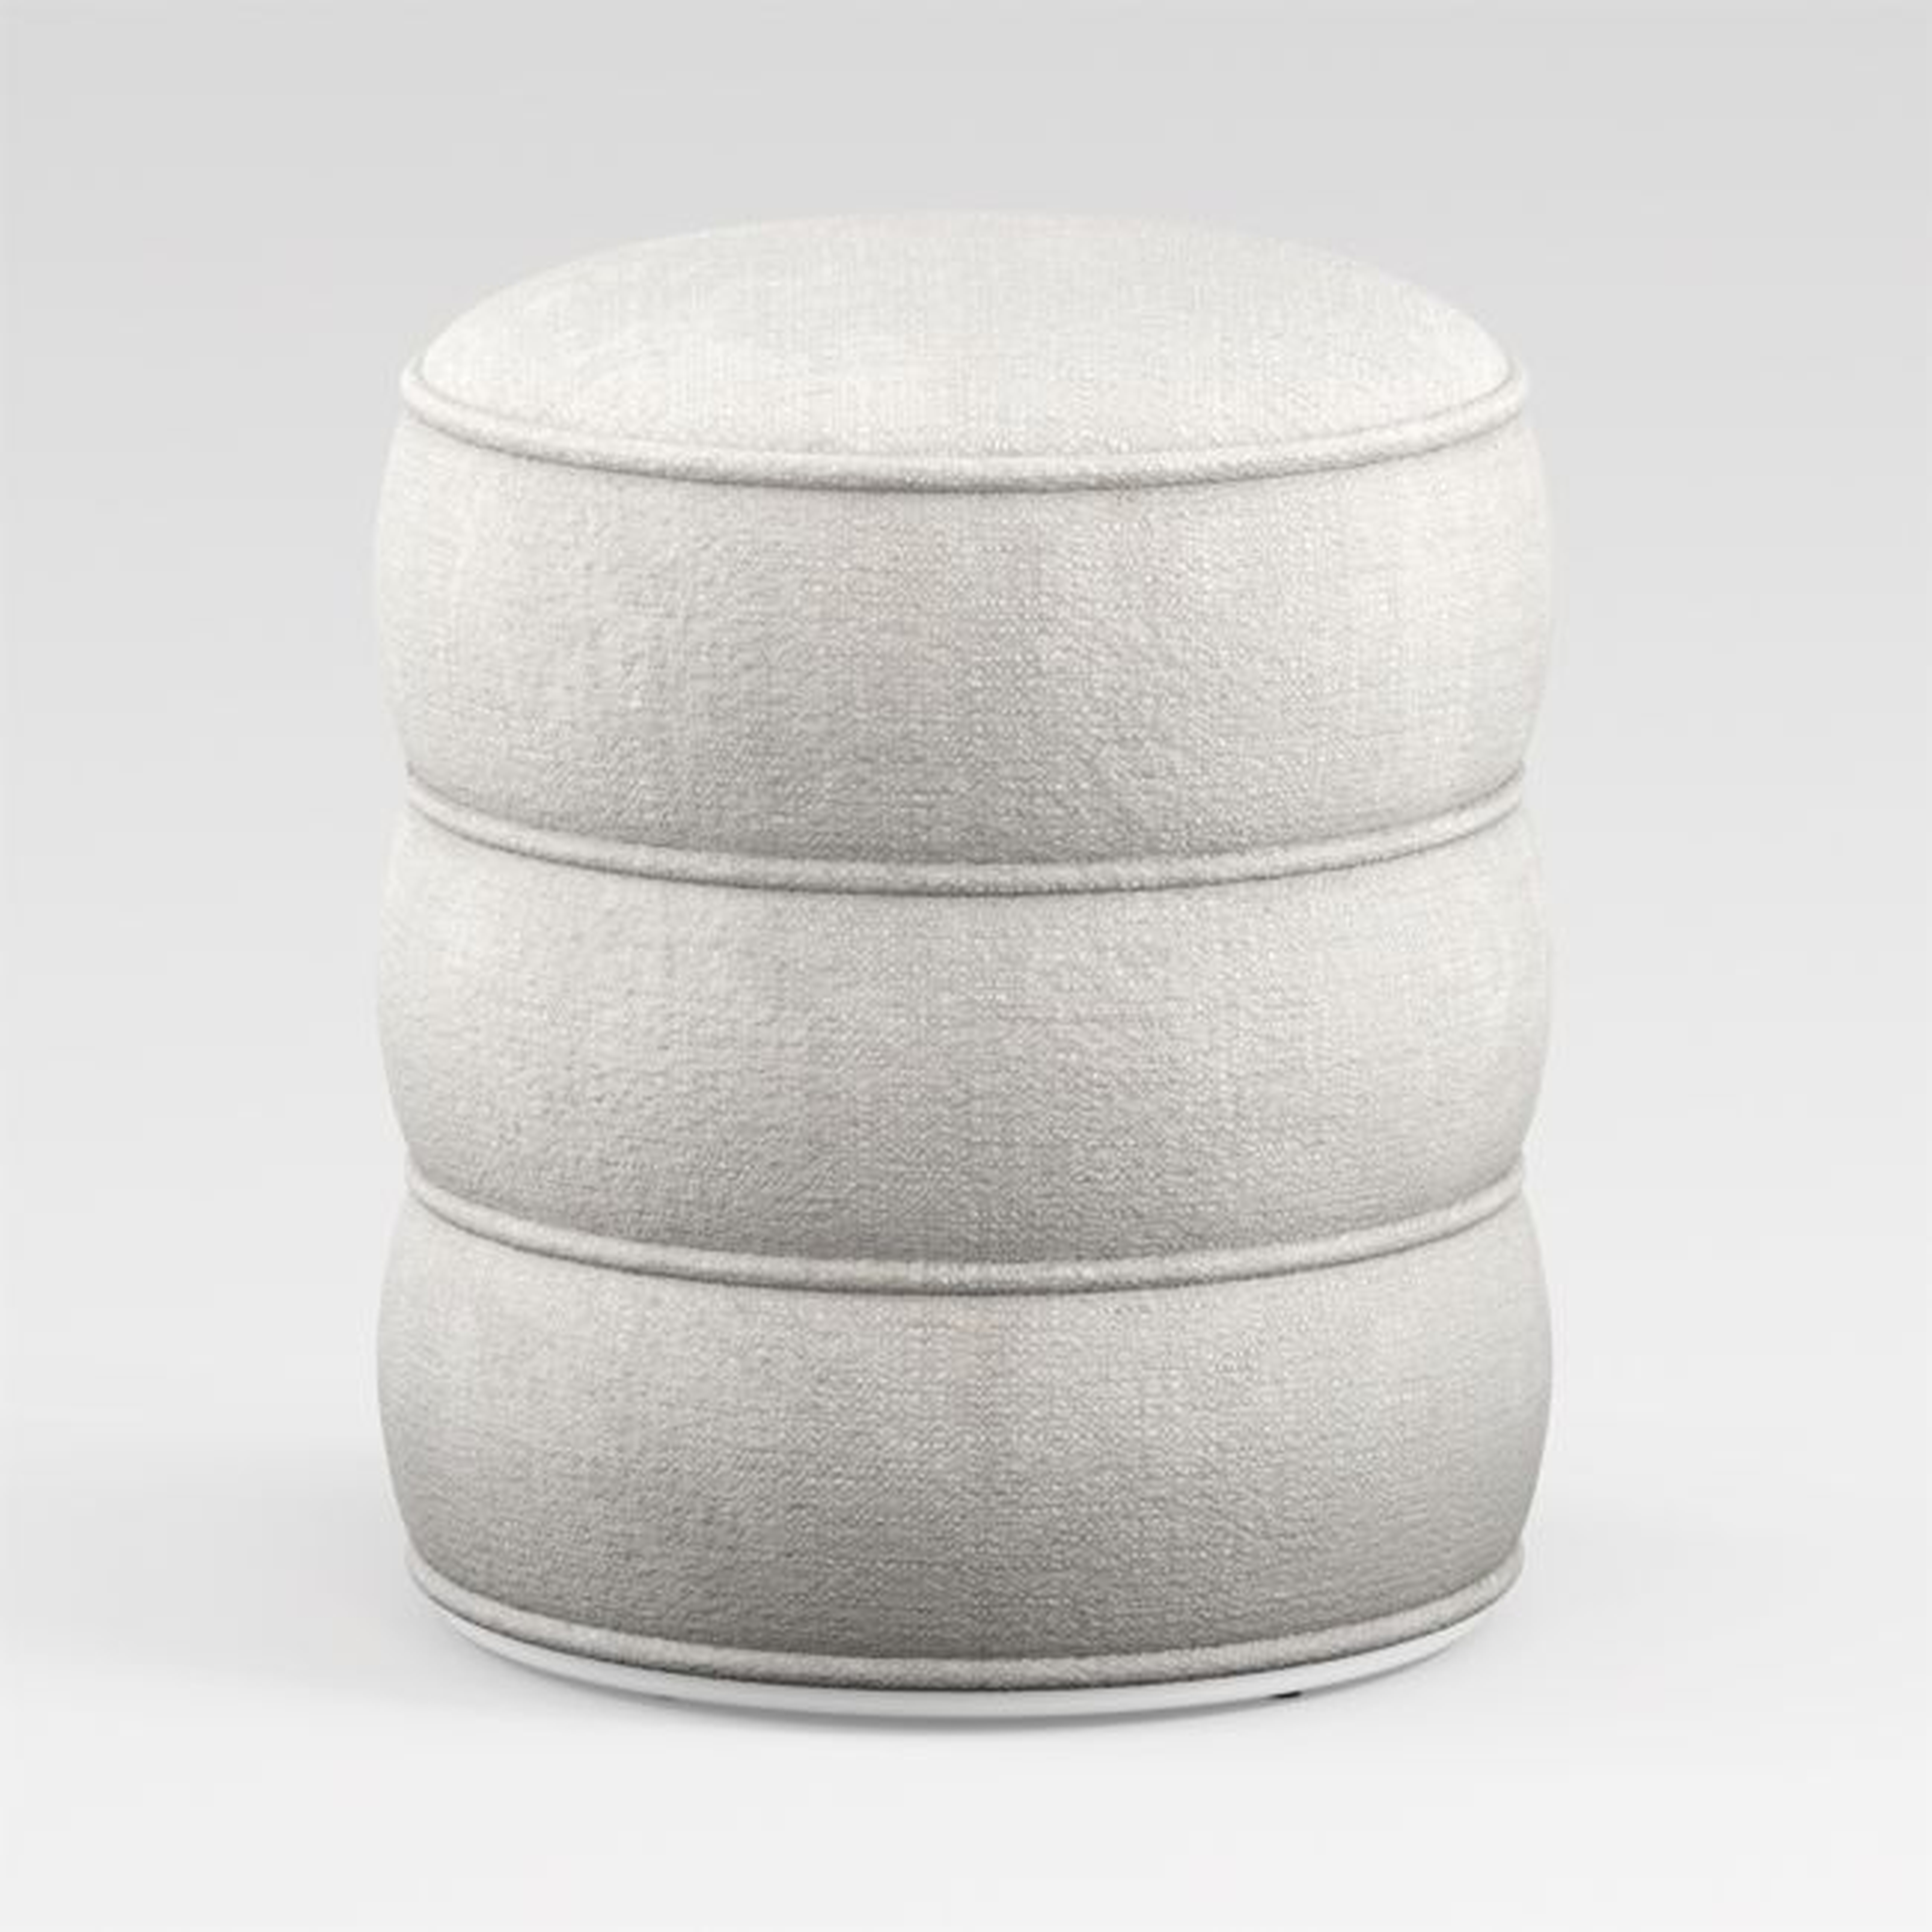 Roselle Kids Pouf Stool - Crate and Barrel